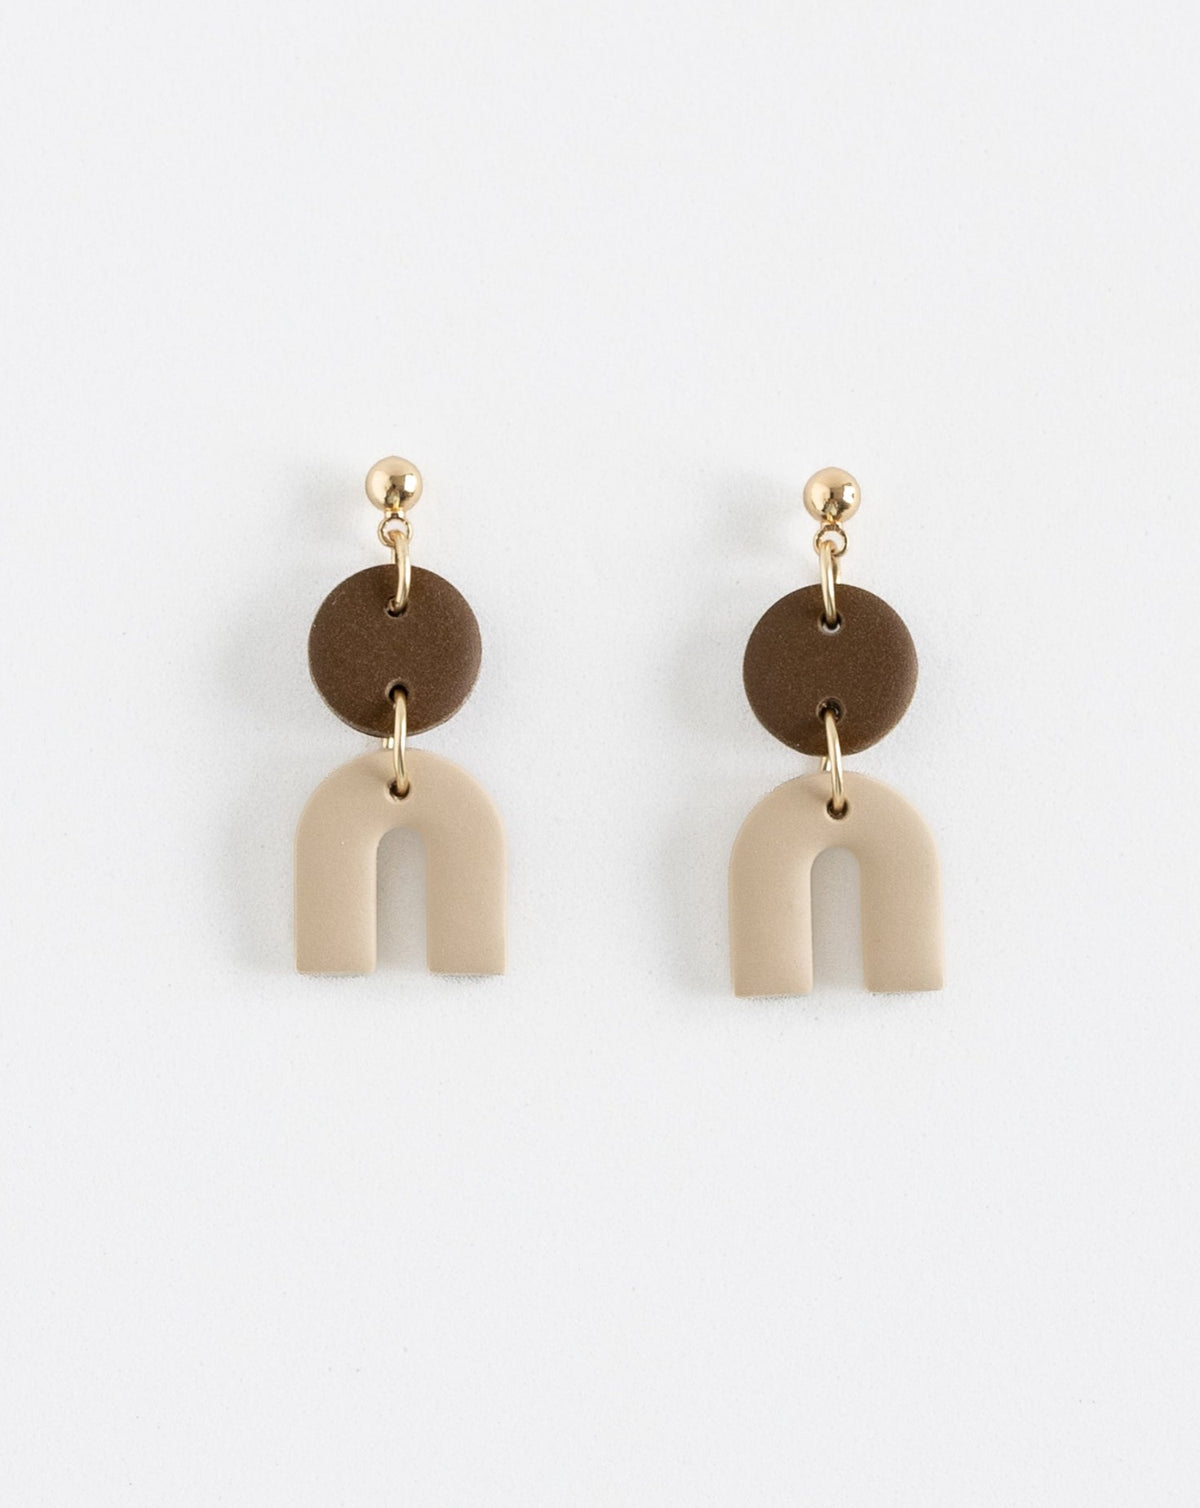 Tiny Arch earrings in two part of brown and beige clay parts with gold plated Ball studs, front view.